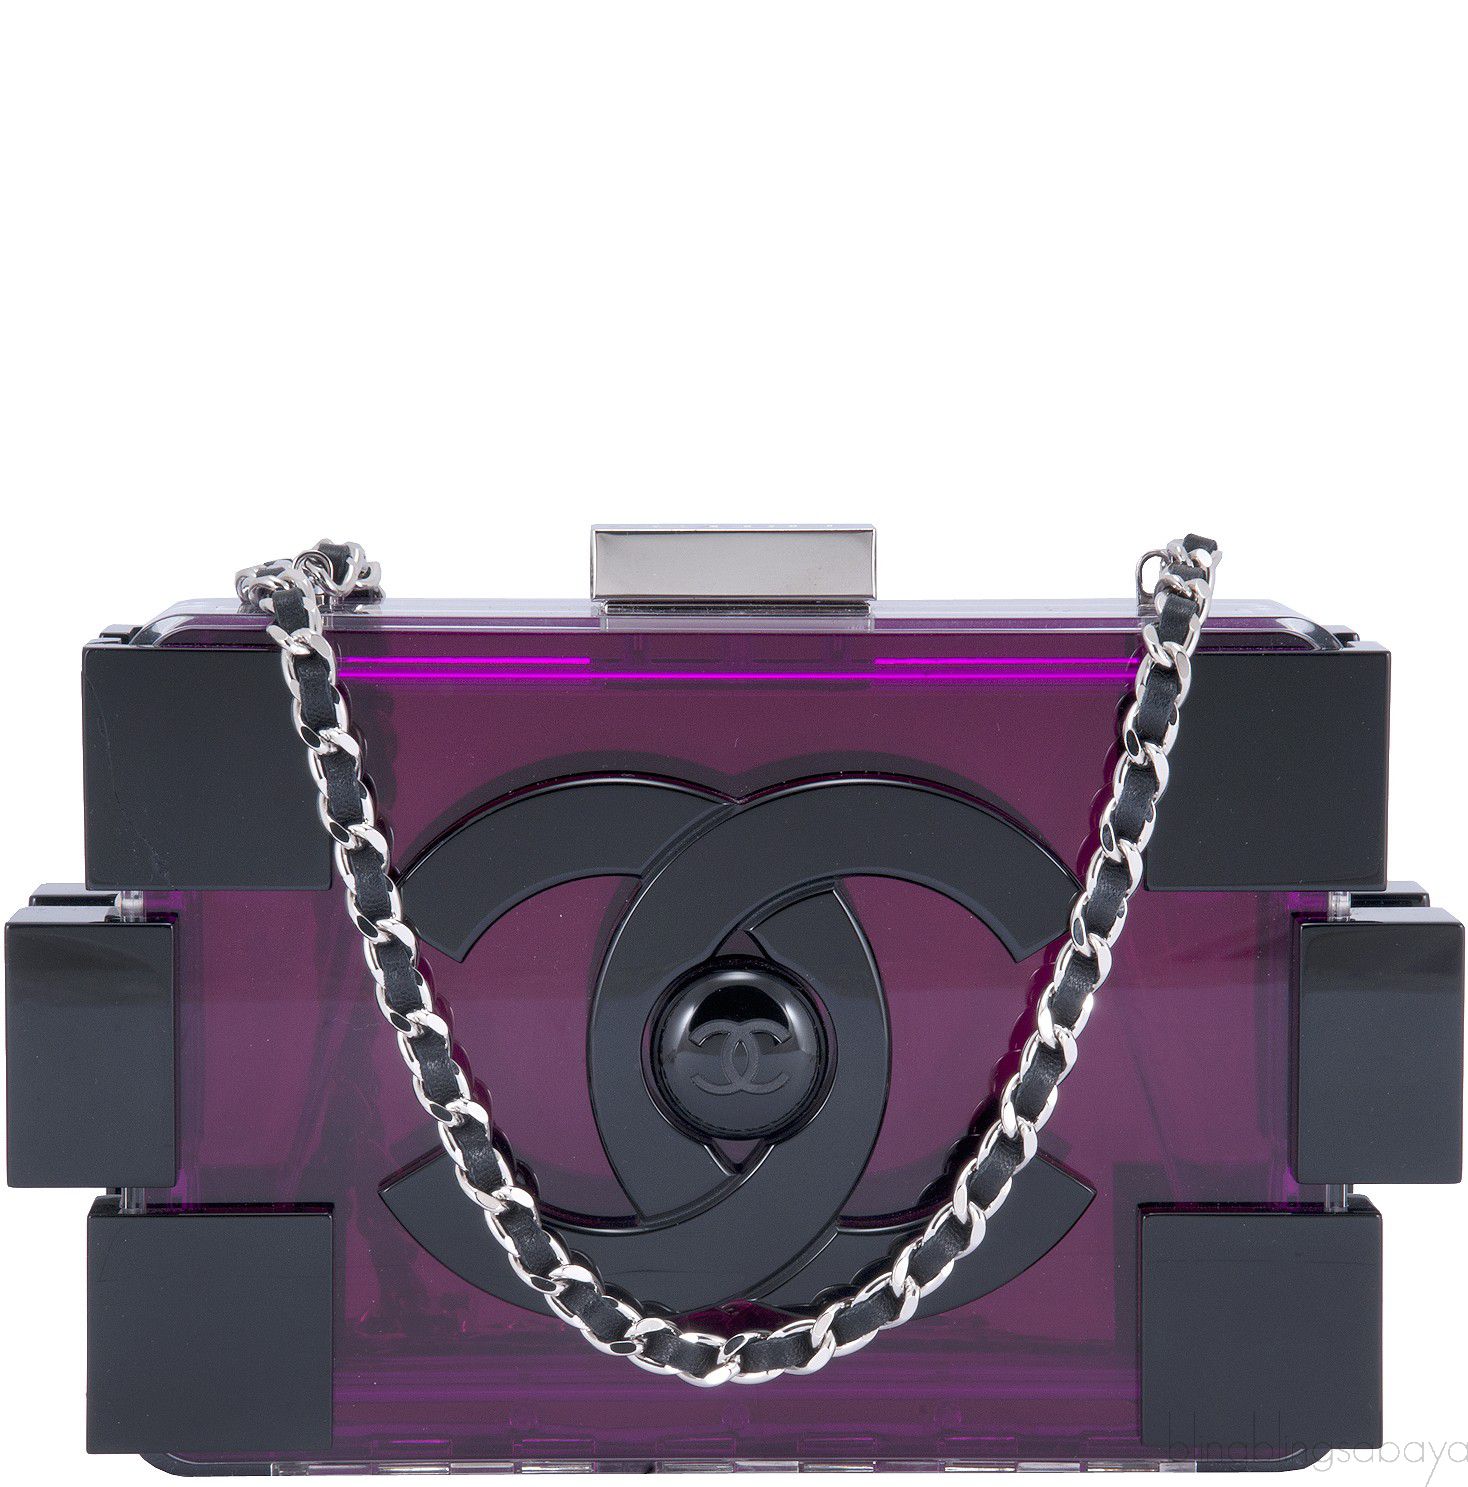 CHANEL, Bags, Chanel Crystal Authentic Chanel Lego Clutch Bag